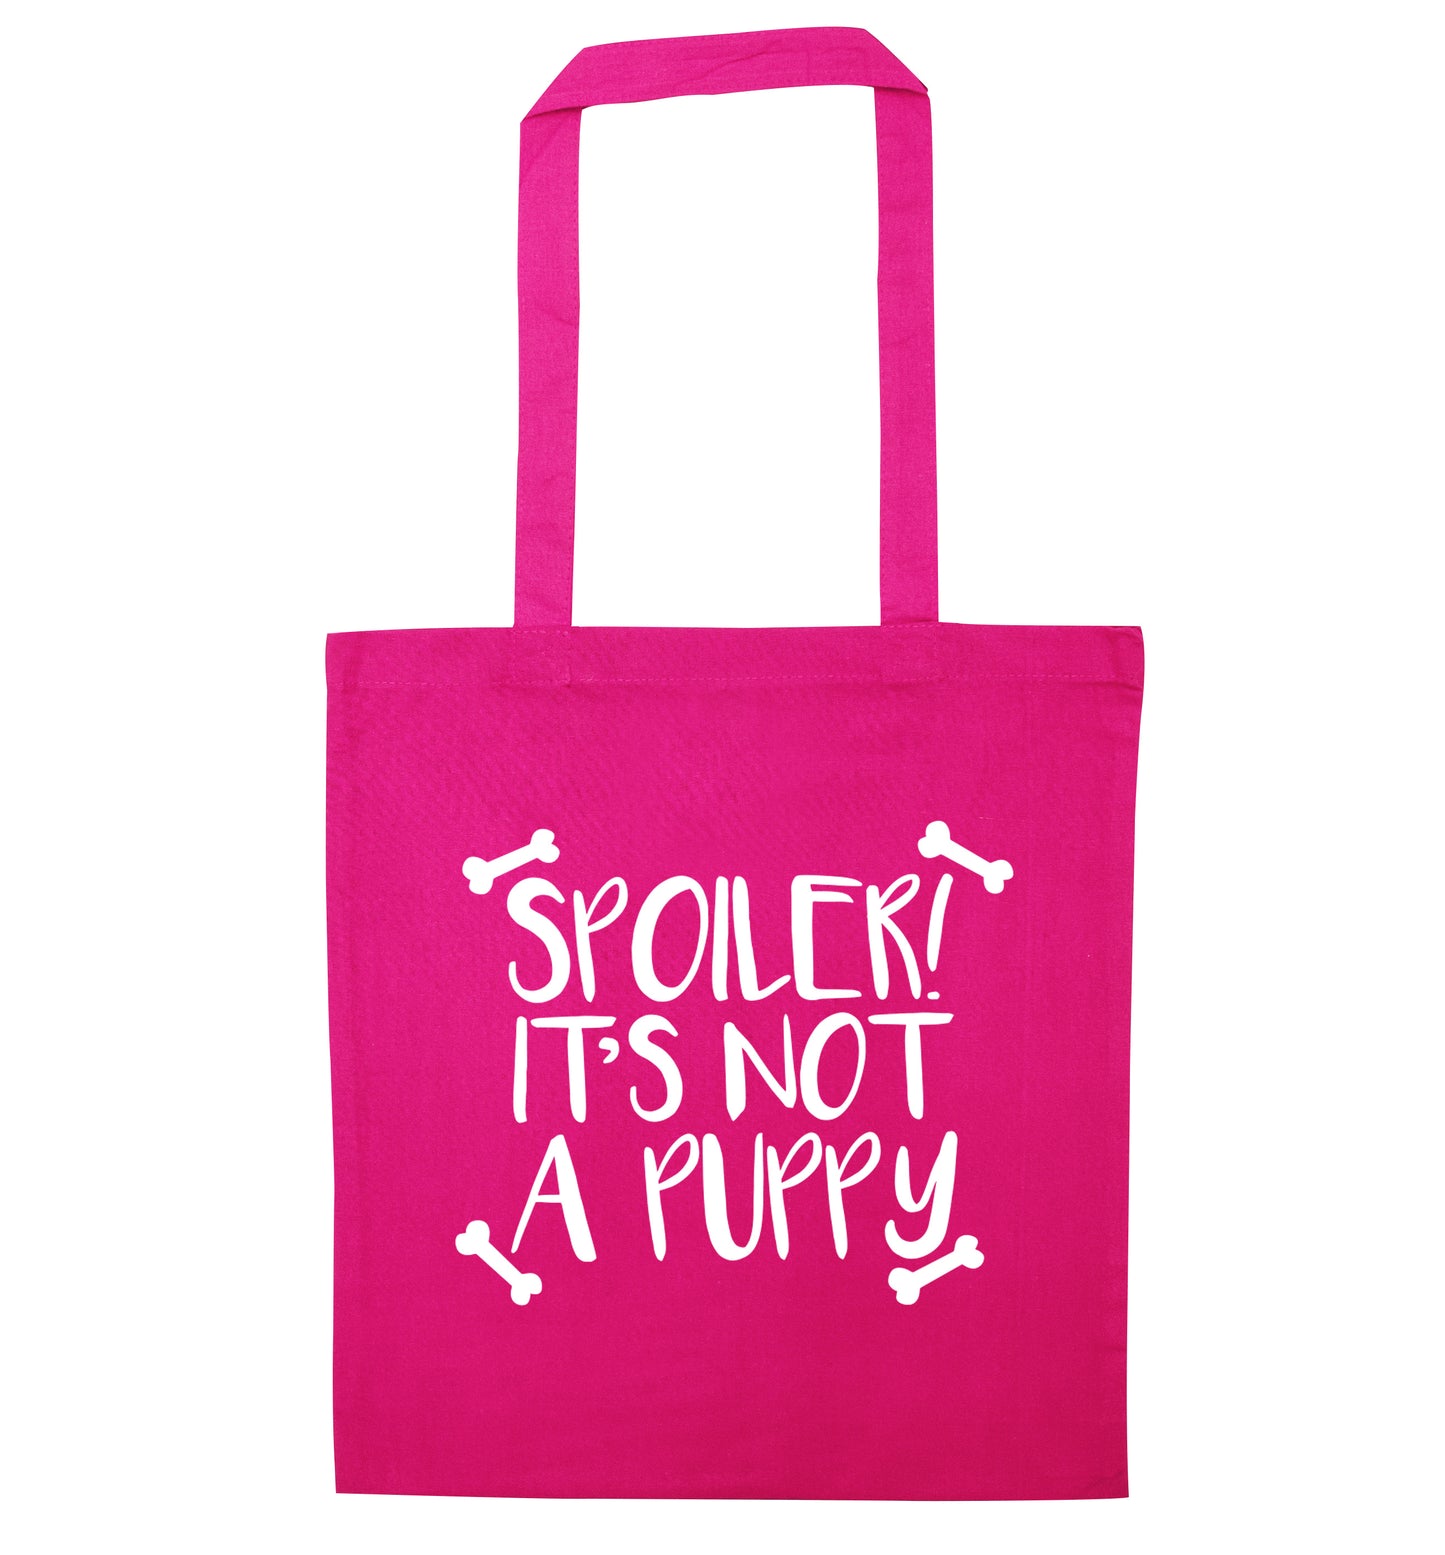 Spoiler it's not a puppy pink tote bag